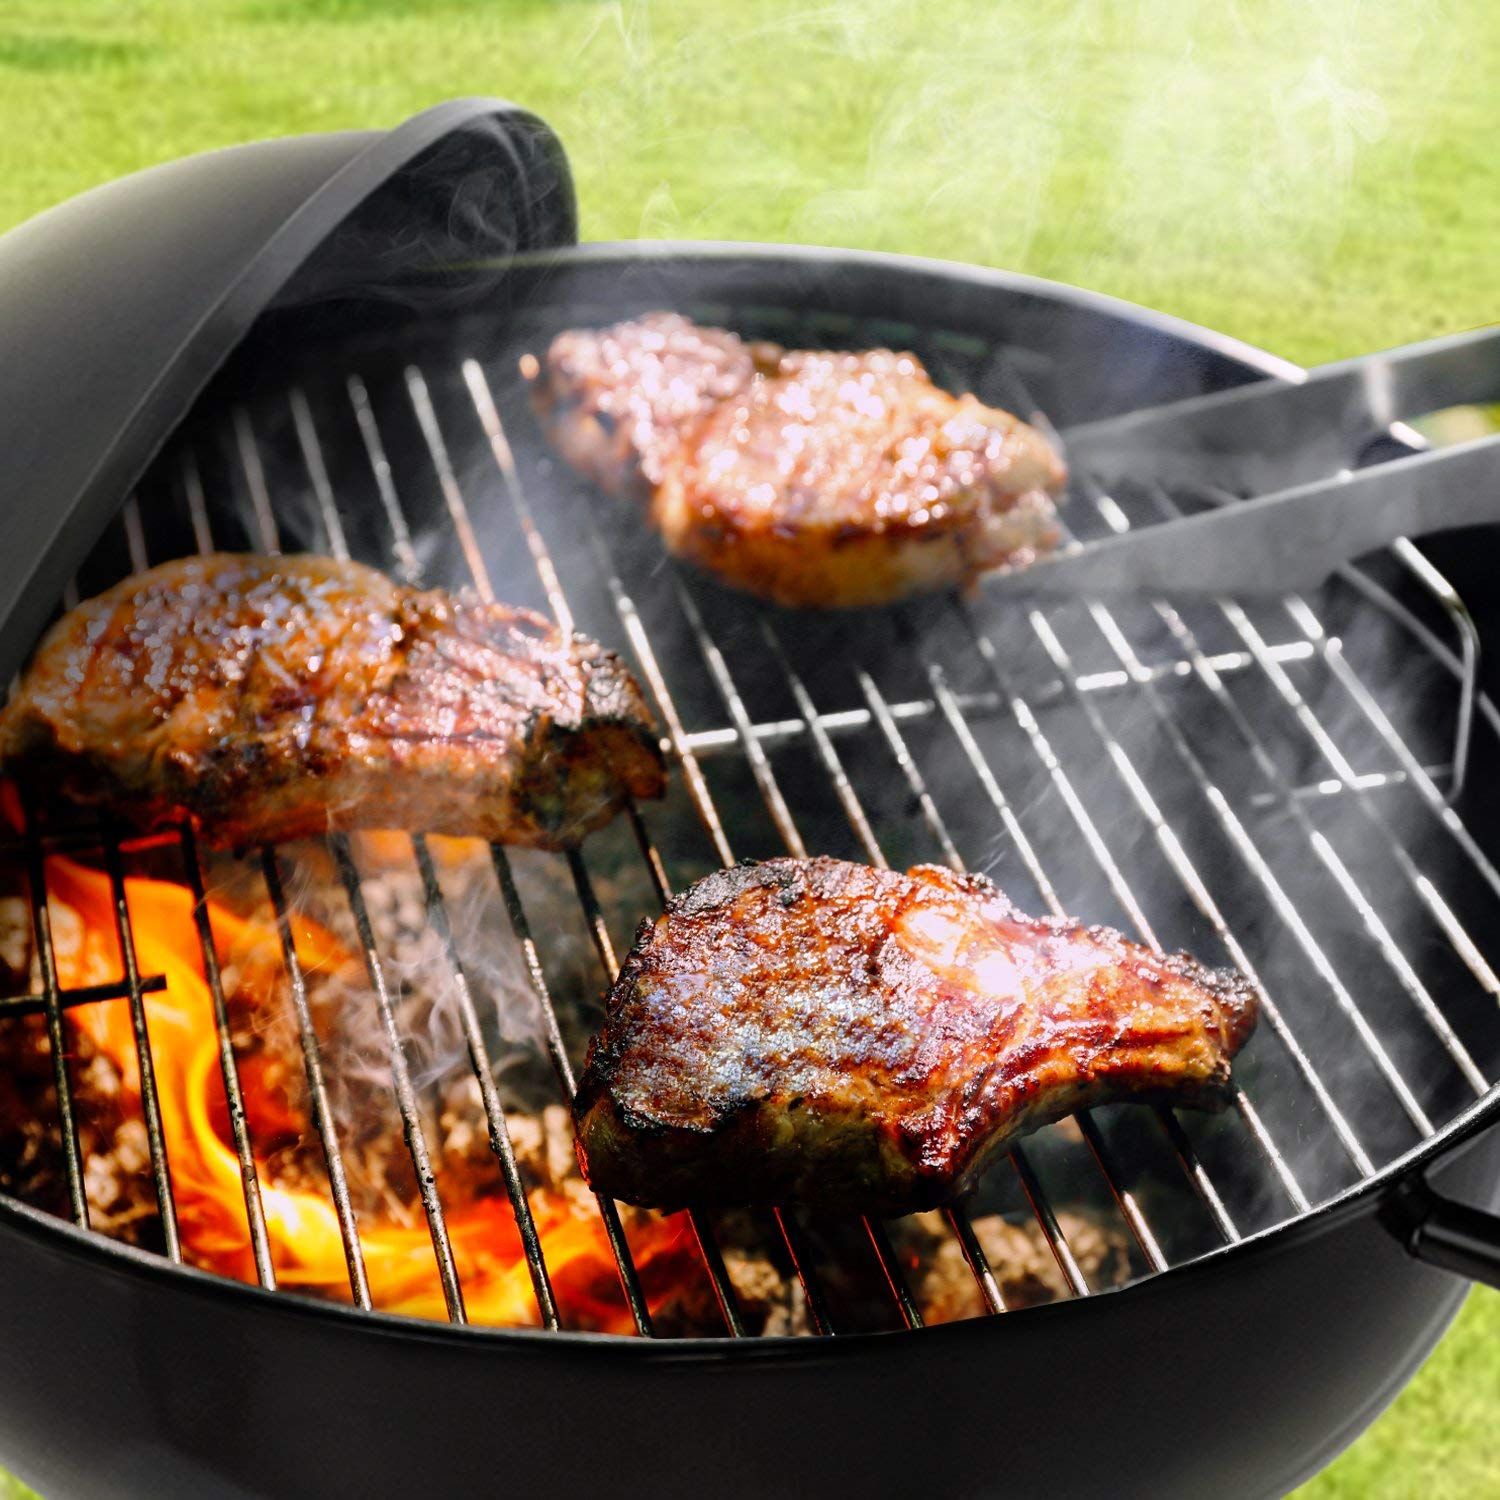 Top Grill - Buy Electric, Charcoal and Propane Grills At Best Prices